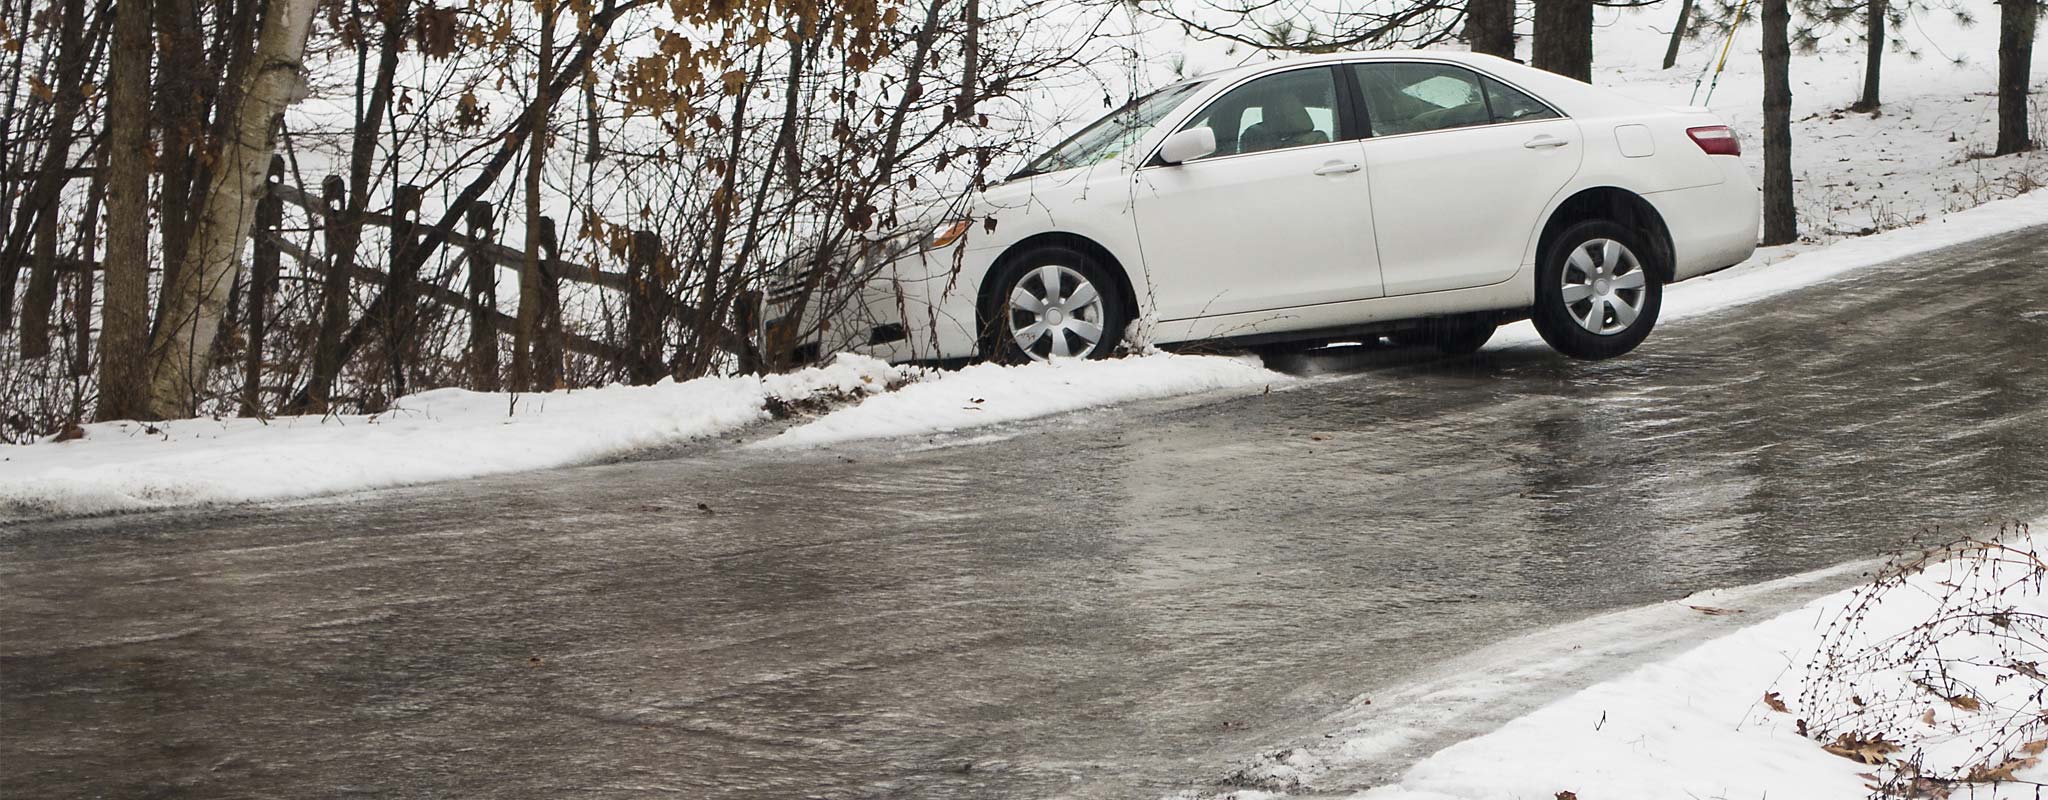 A car in the ditch after sliding off an icy road.